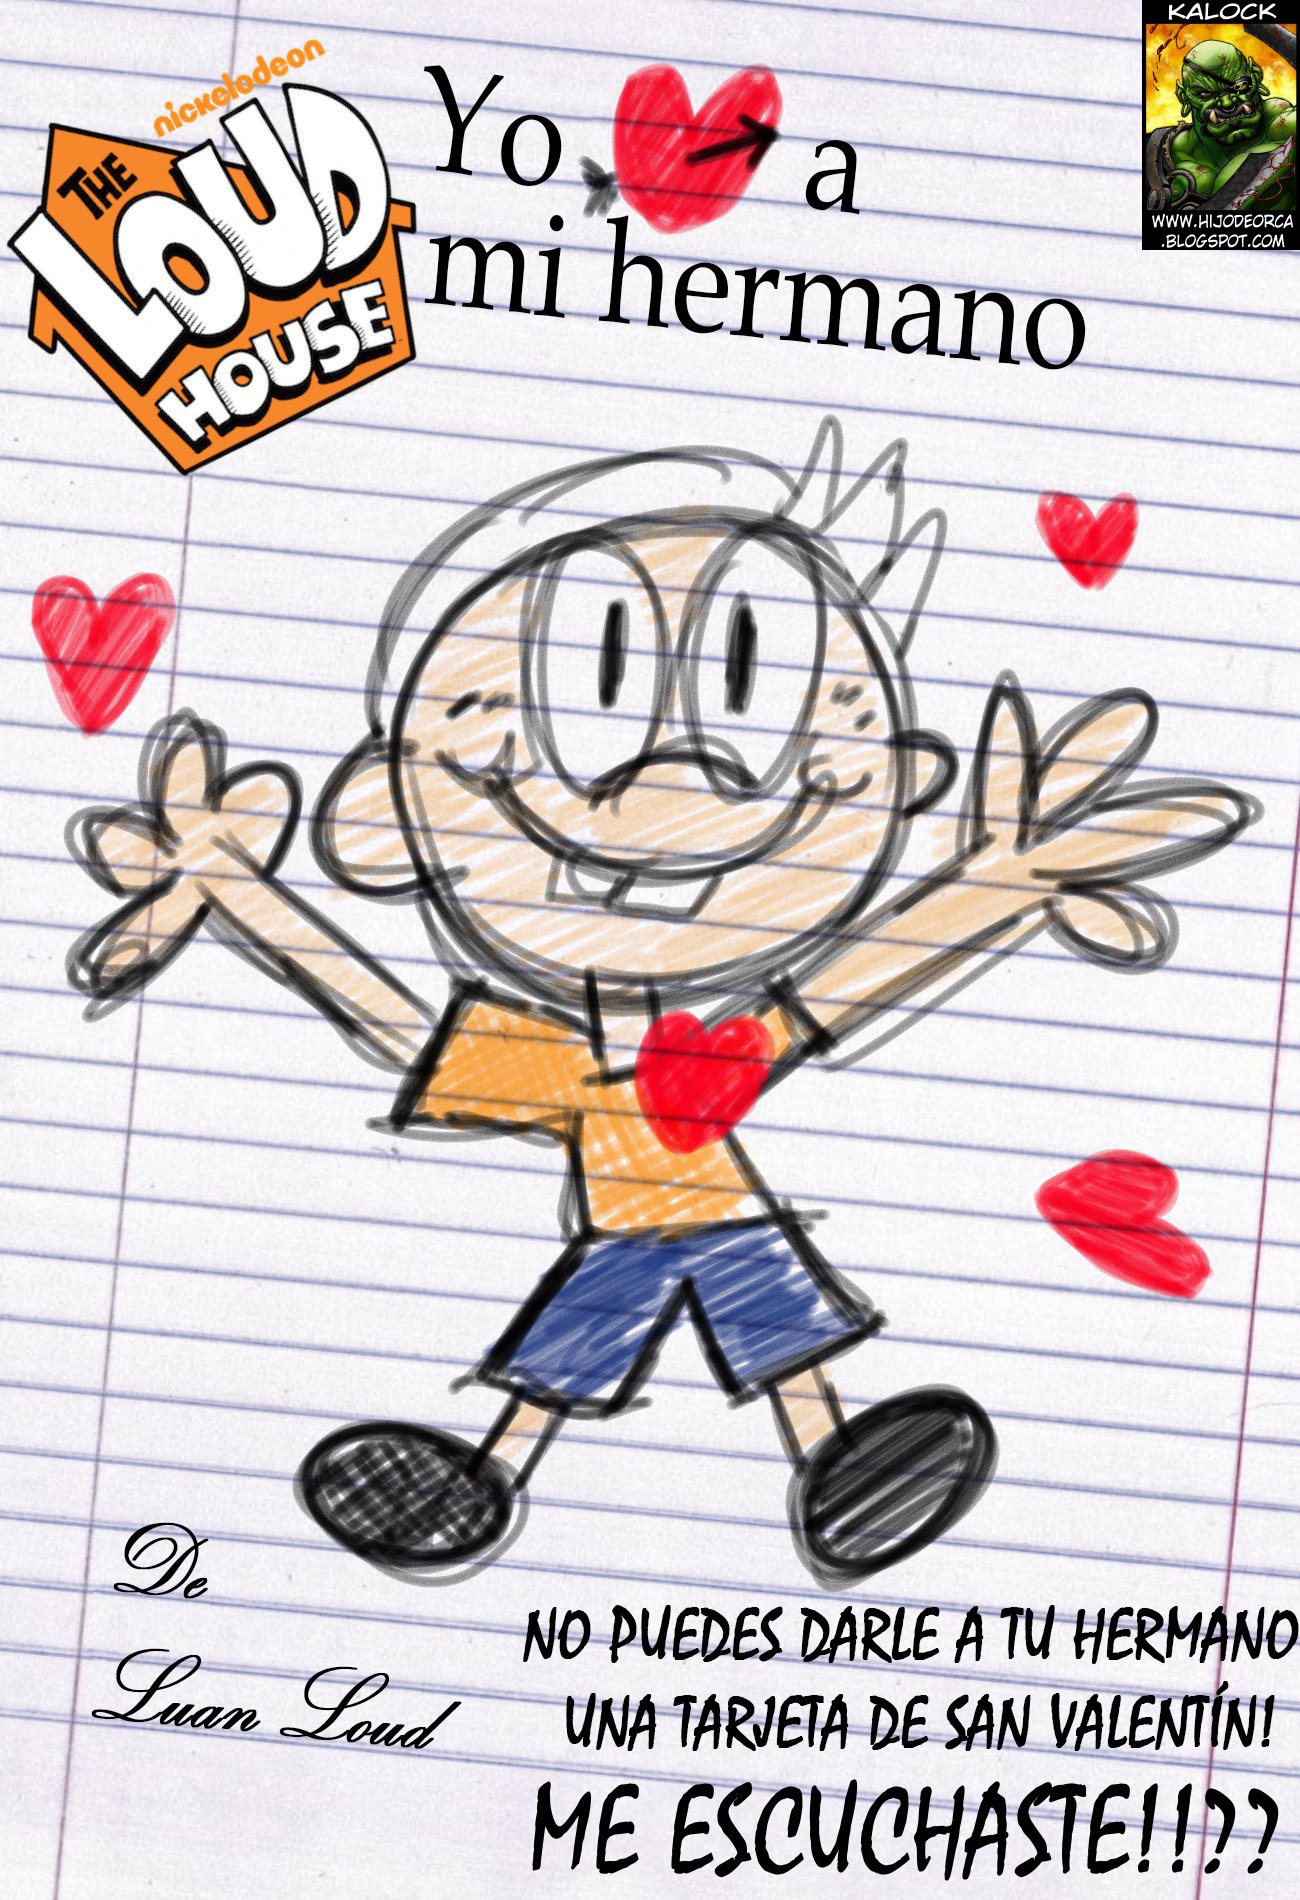 Sister and brother sex comic The Loud House 1 - JumpJump - Spanish